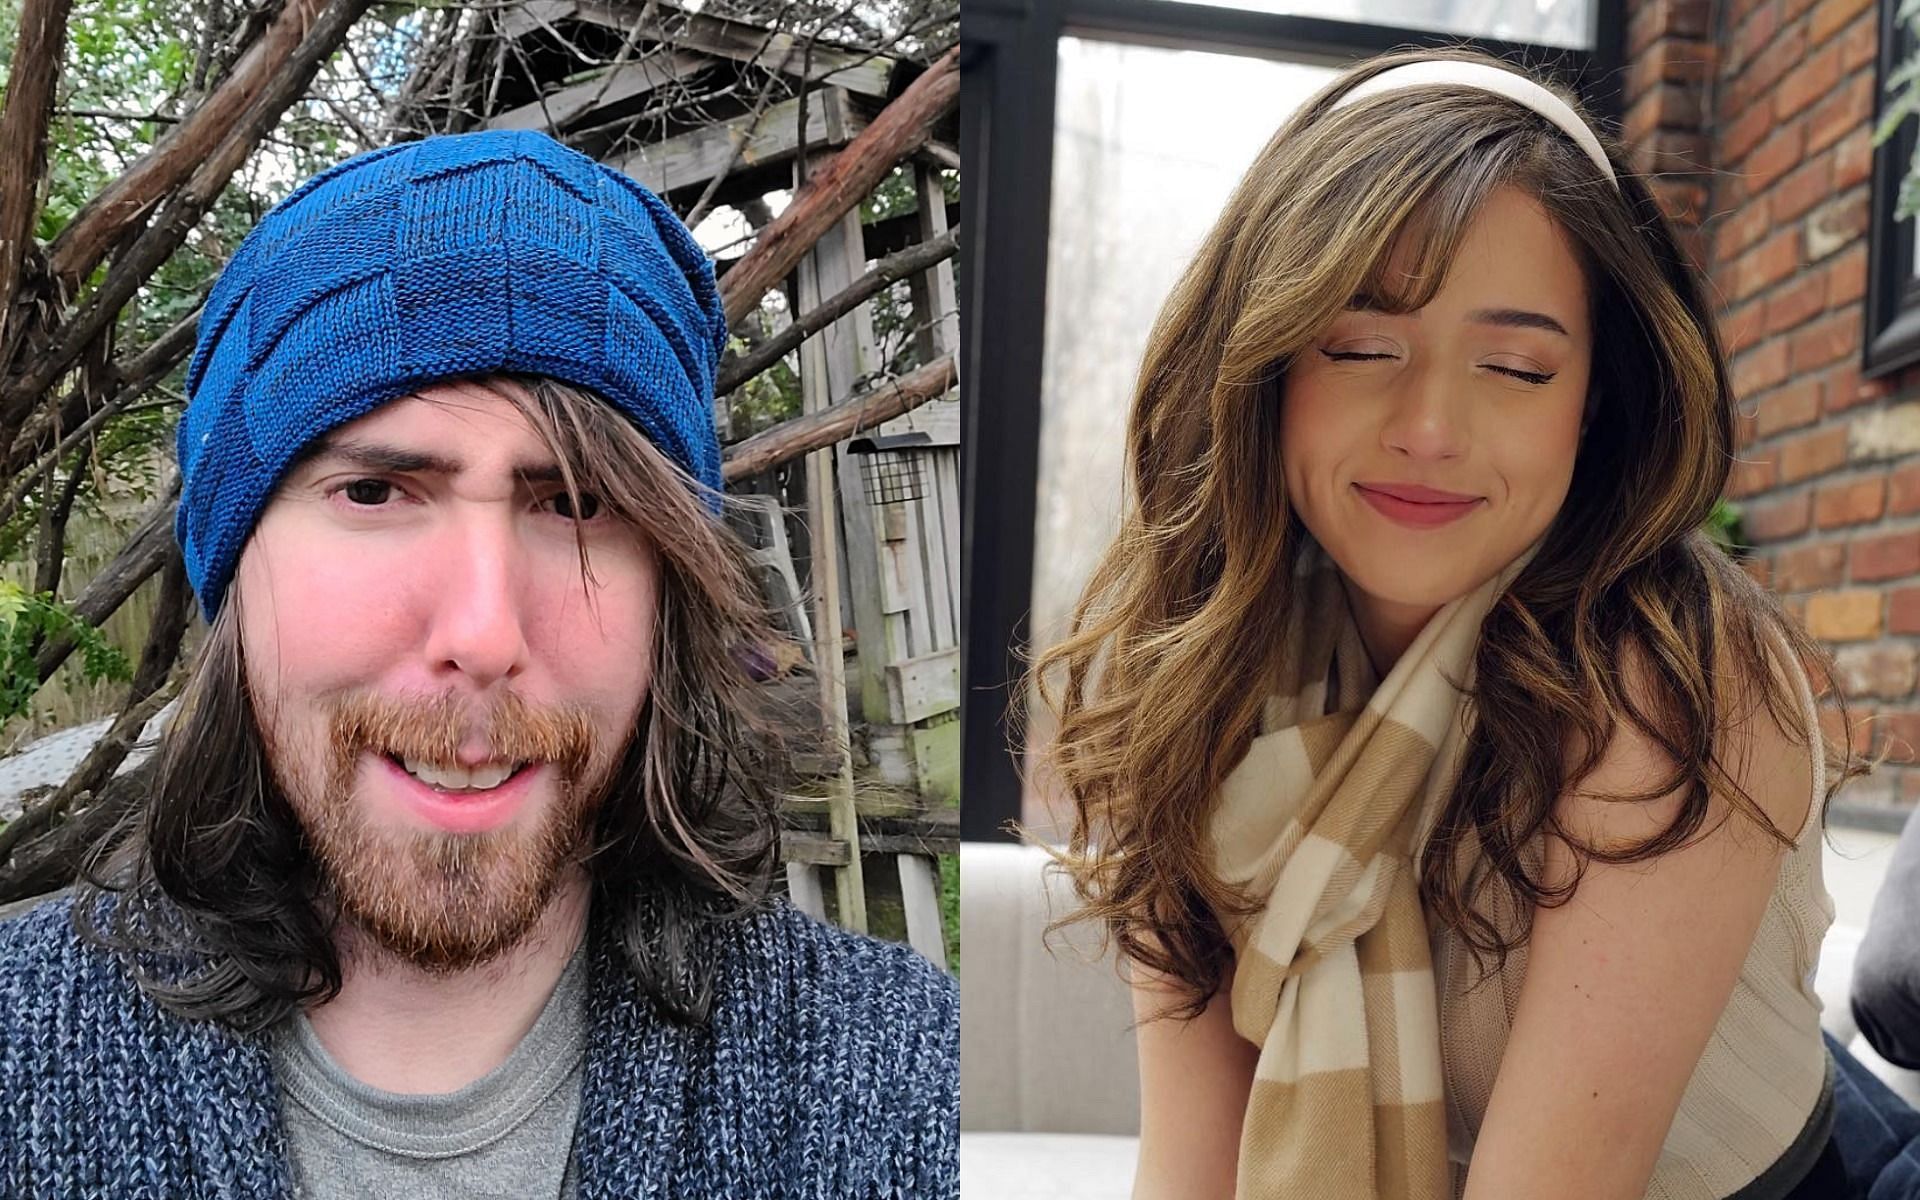 Asmongold defends Pokimane, hits back at rude comments from viewer (Image via Twitter/Asmongold/pokimanelol)